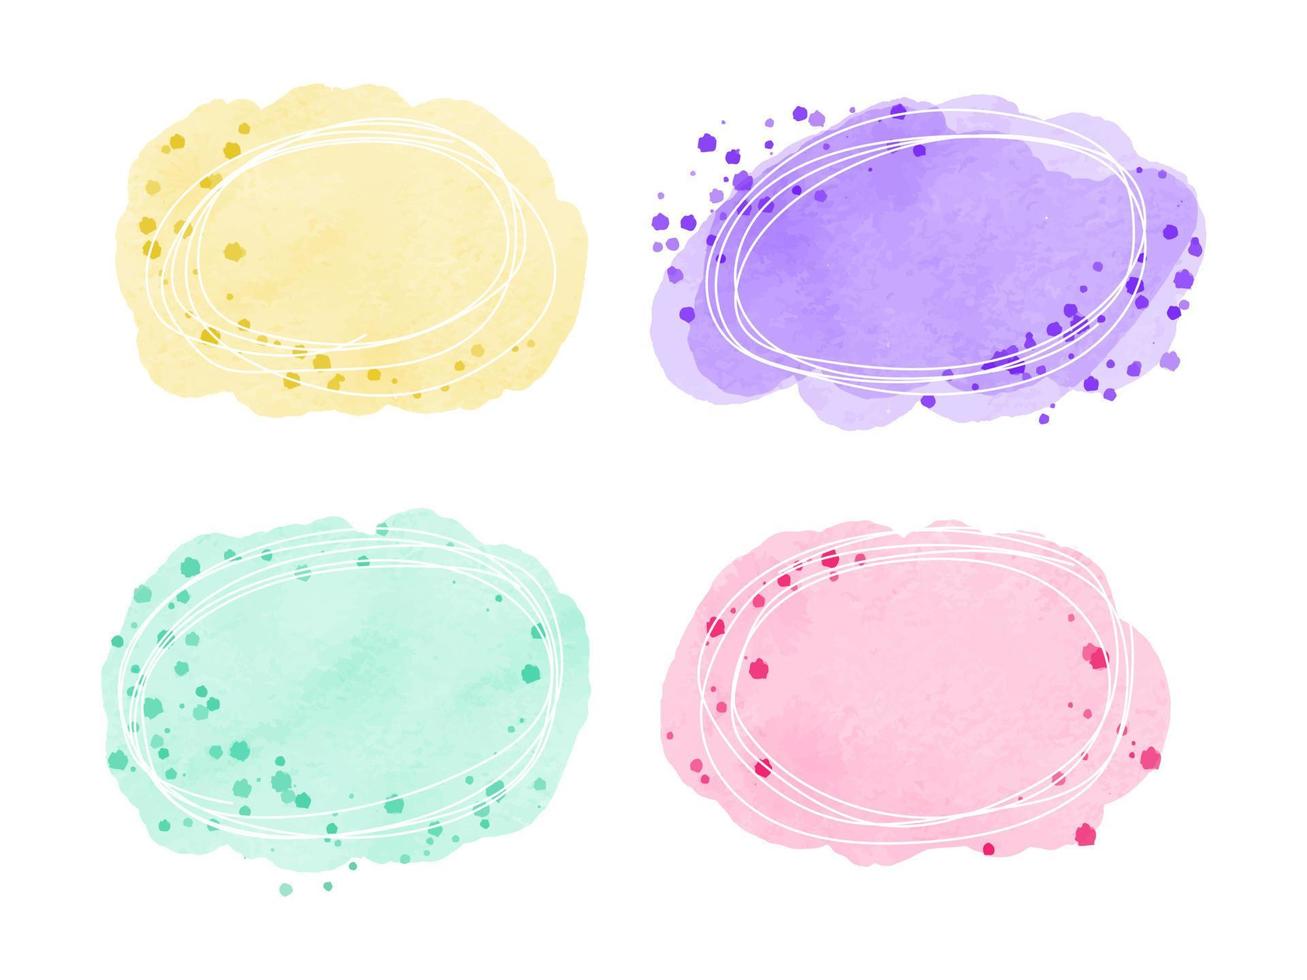 Pastel watercolor spots set with white frames as a background for inscriptions. Collection of colorful backgrounds vector